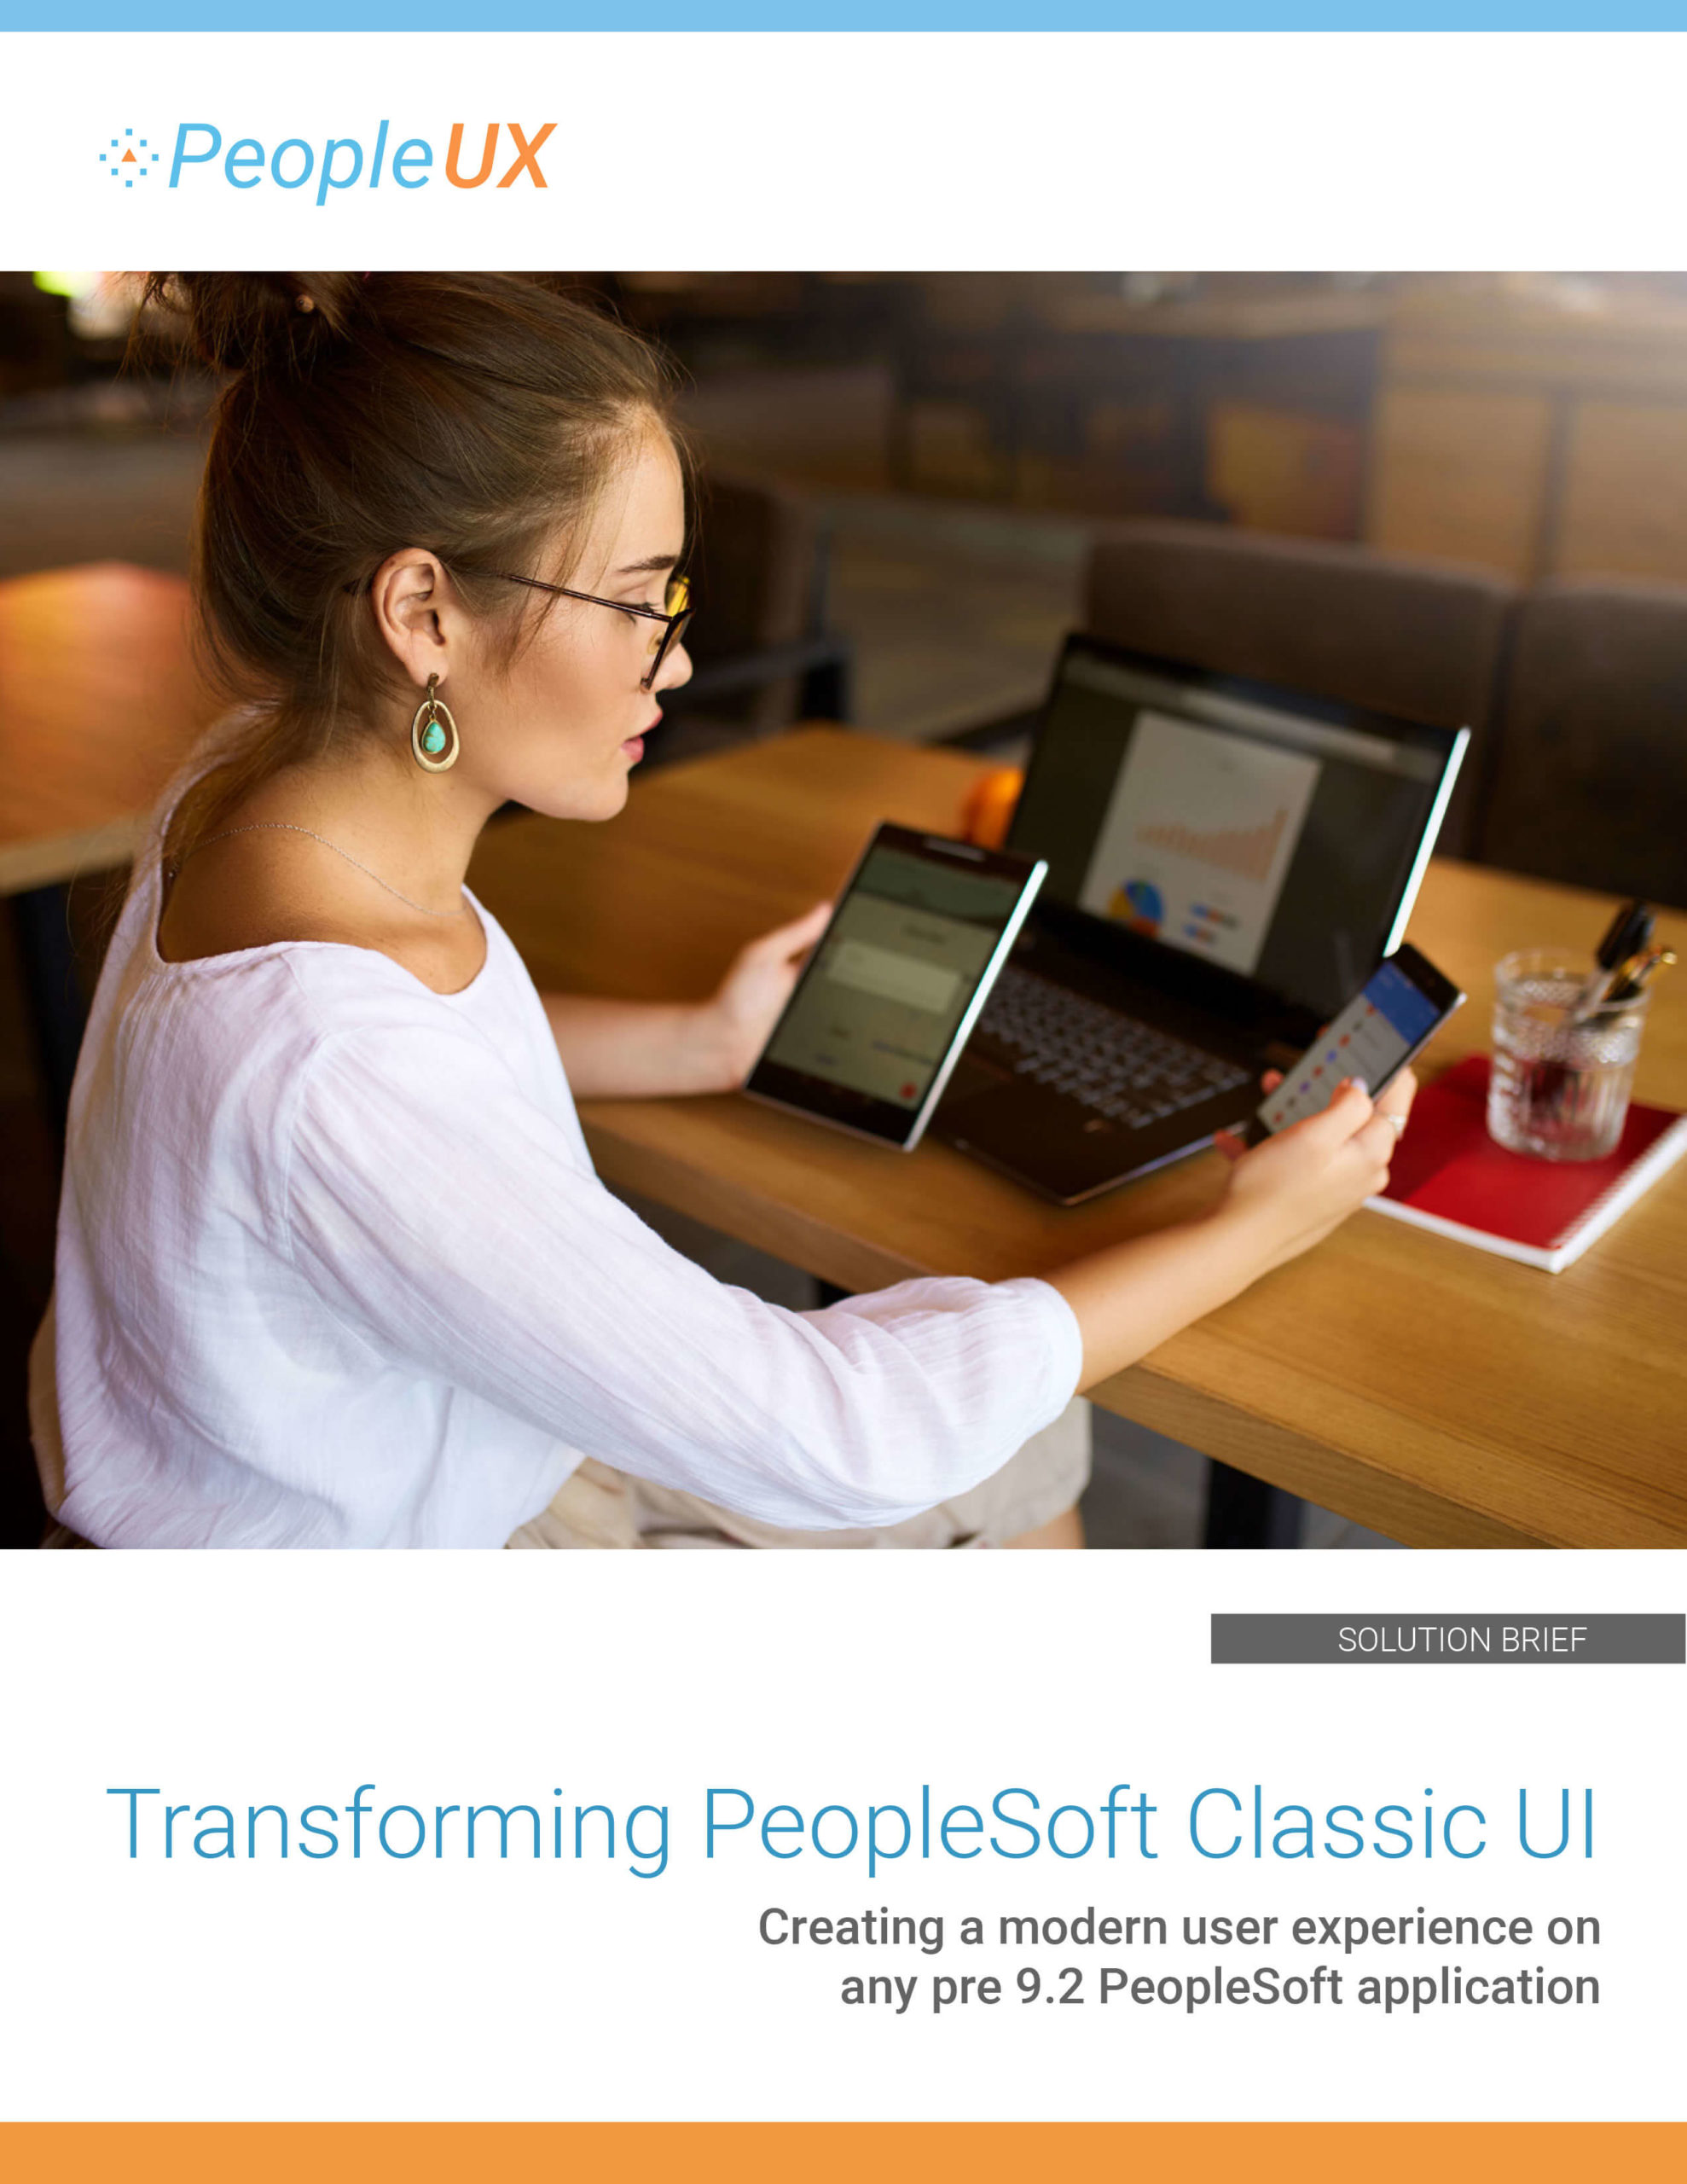 Creating a modern user experience on any pre 9.2 PeopleSoft application